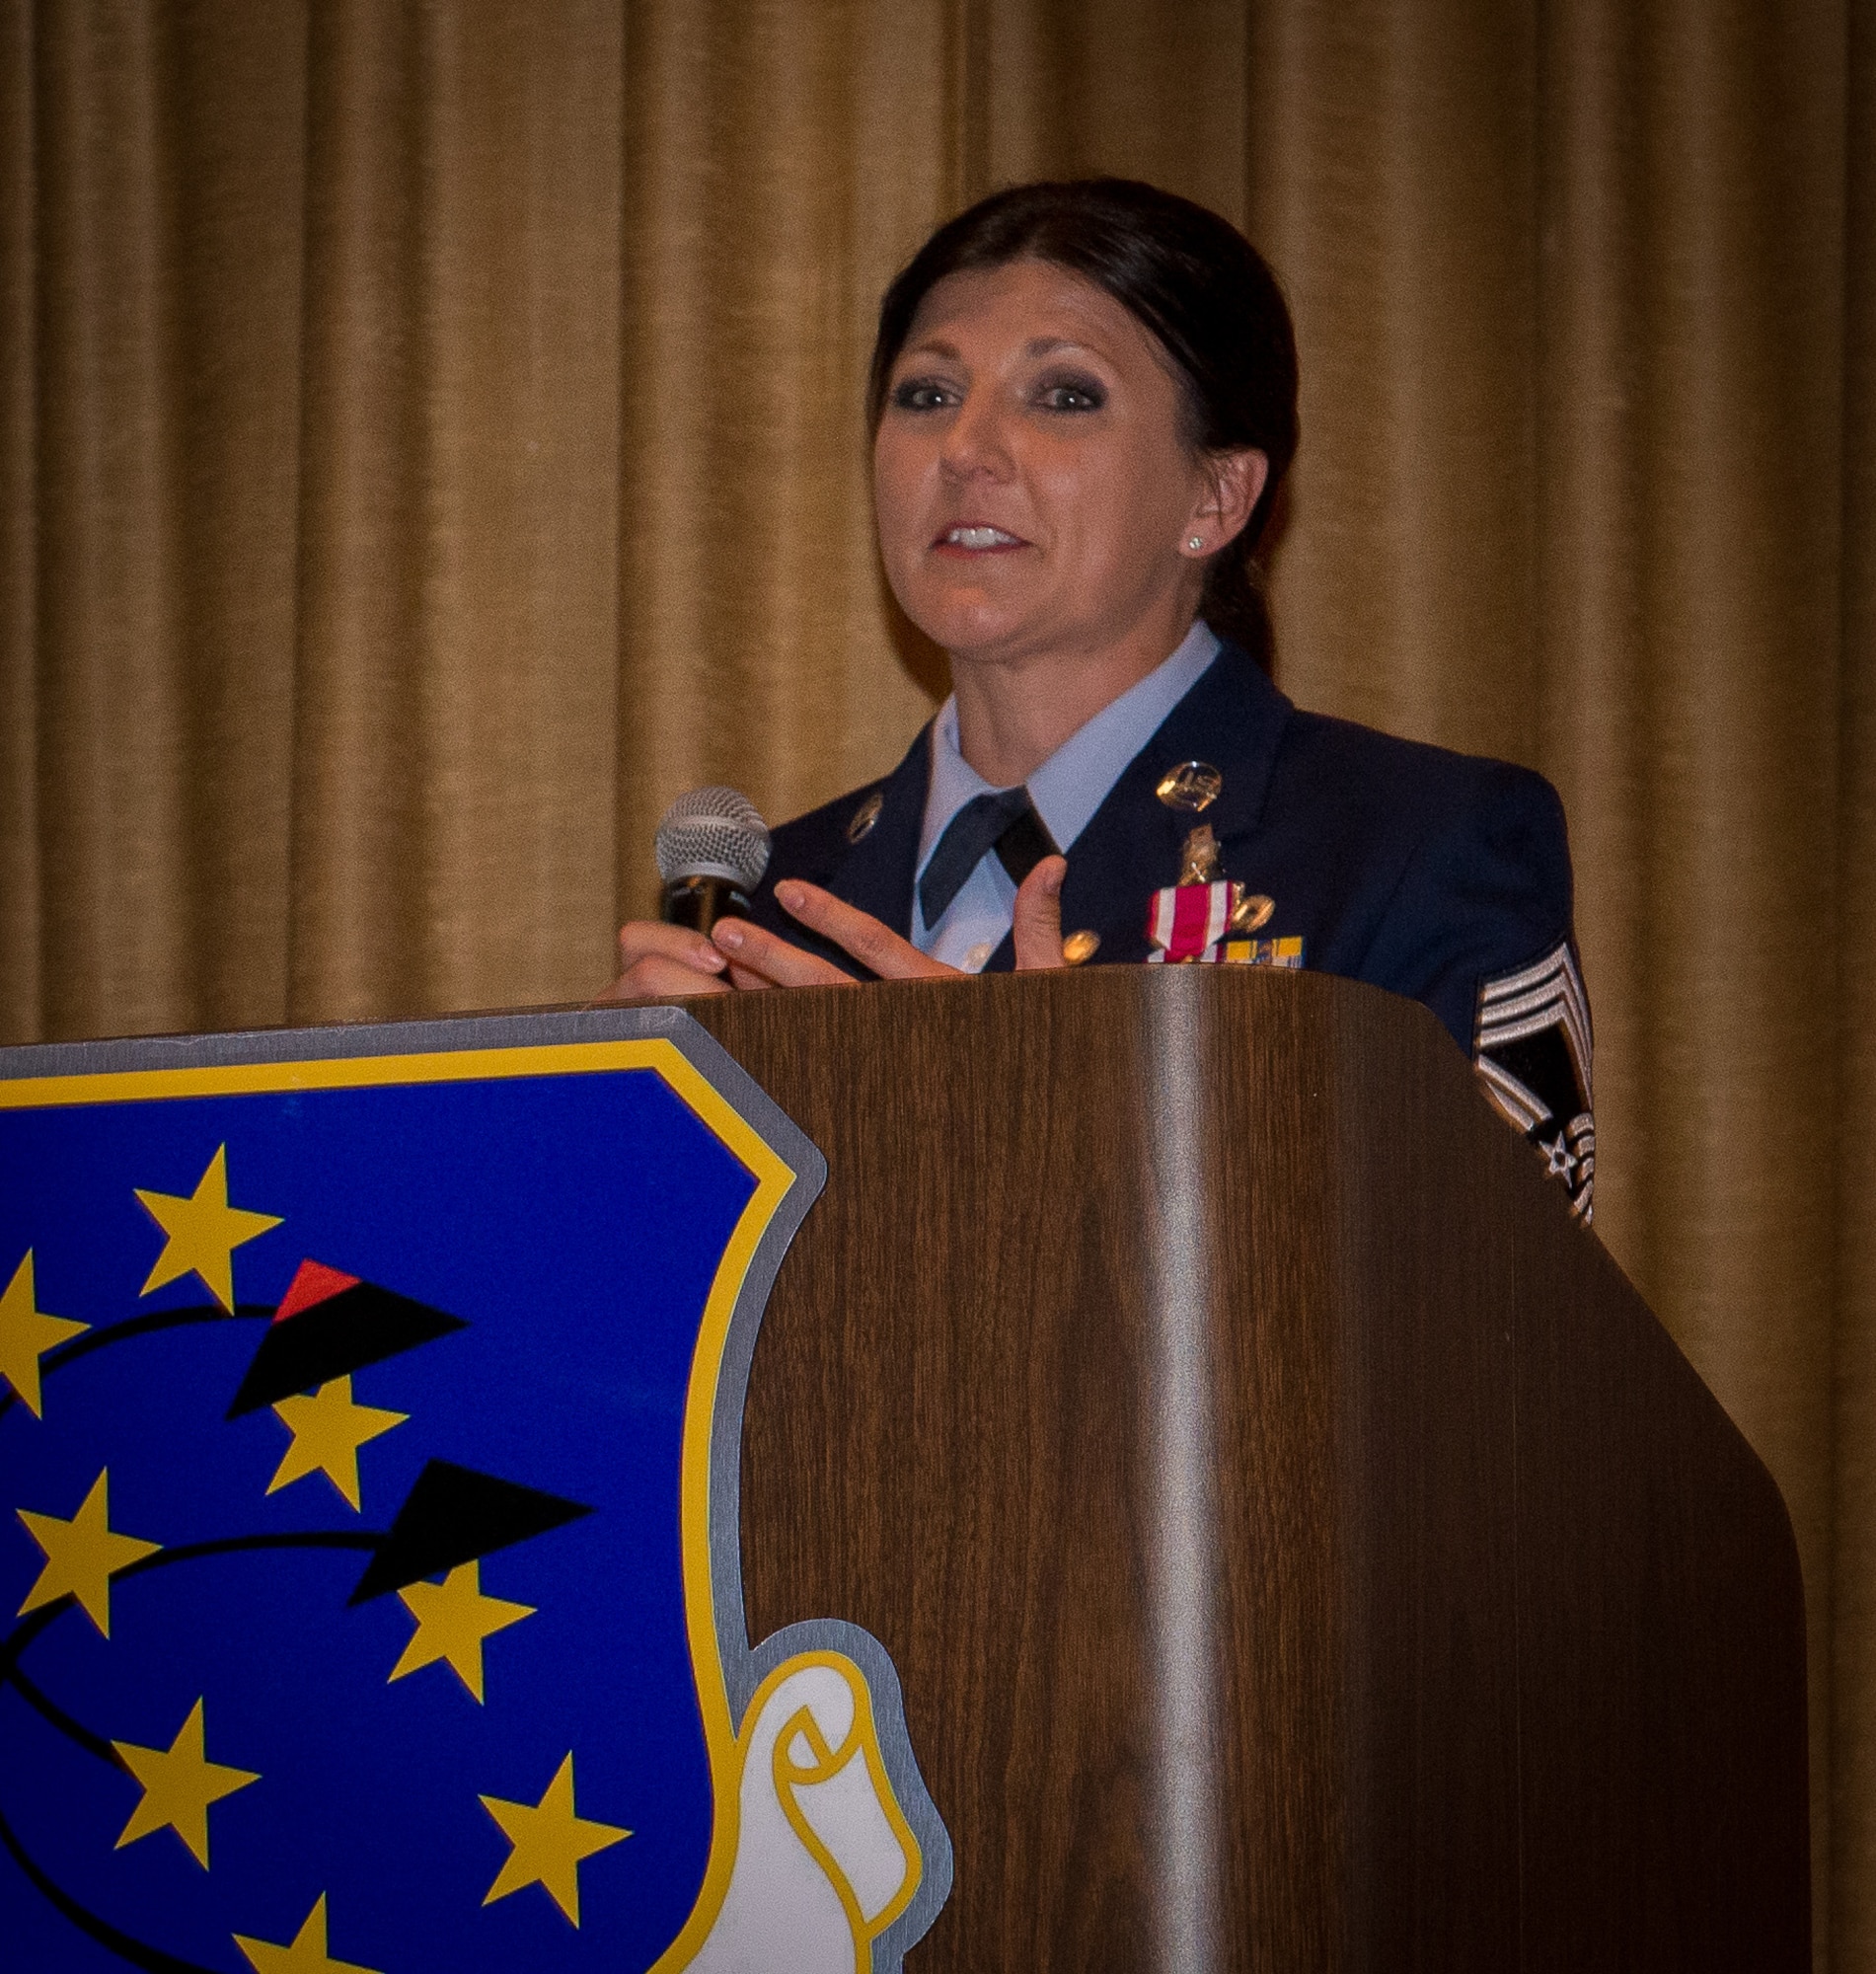 Chief Master Sgt. Kristy Long, 44th Fighter Group senior enlisted leader, addresses attendees at her retirement ceremony at Eglin AFB, April 1. She shared challenges, victories and her gratitude to her Airmen, family and friends for their support. (U.S. Air Force photo by Master Sgt. Jeremy Roman)